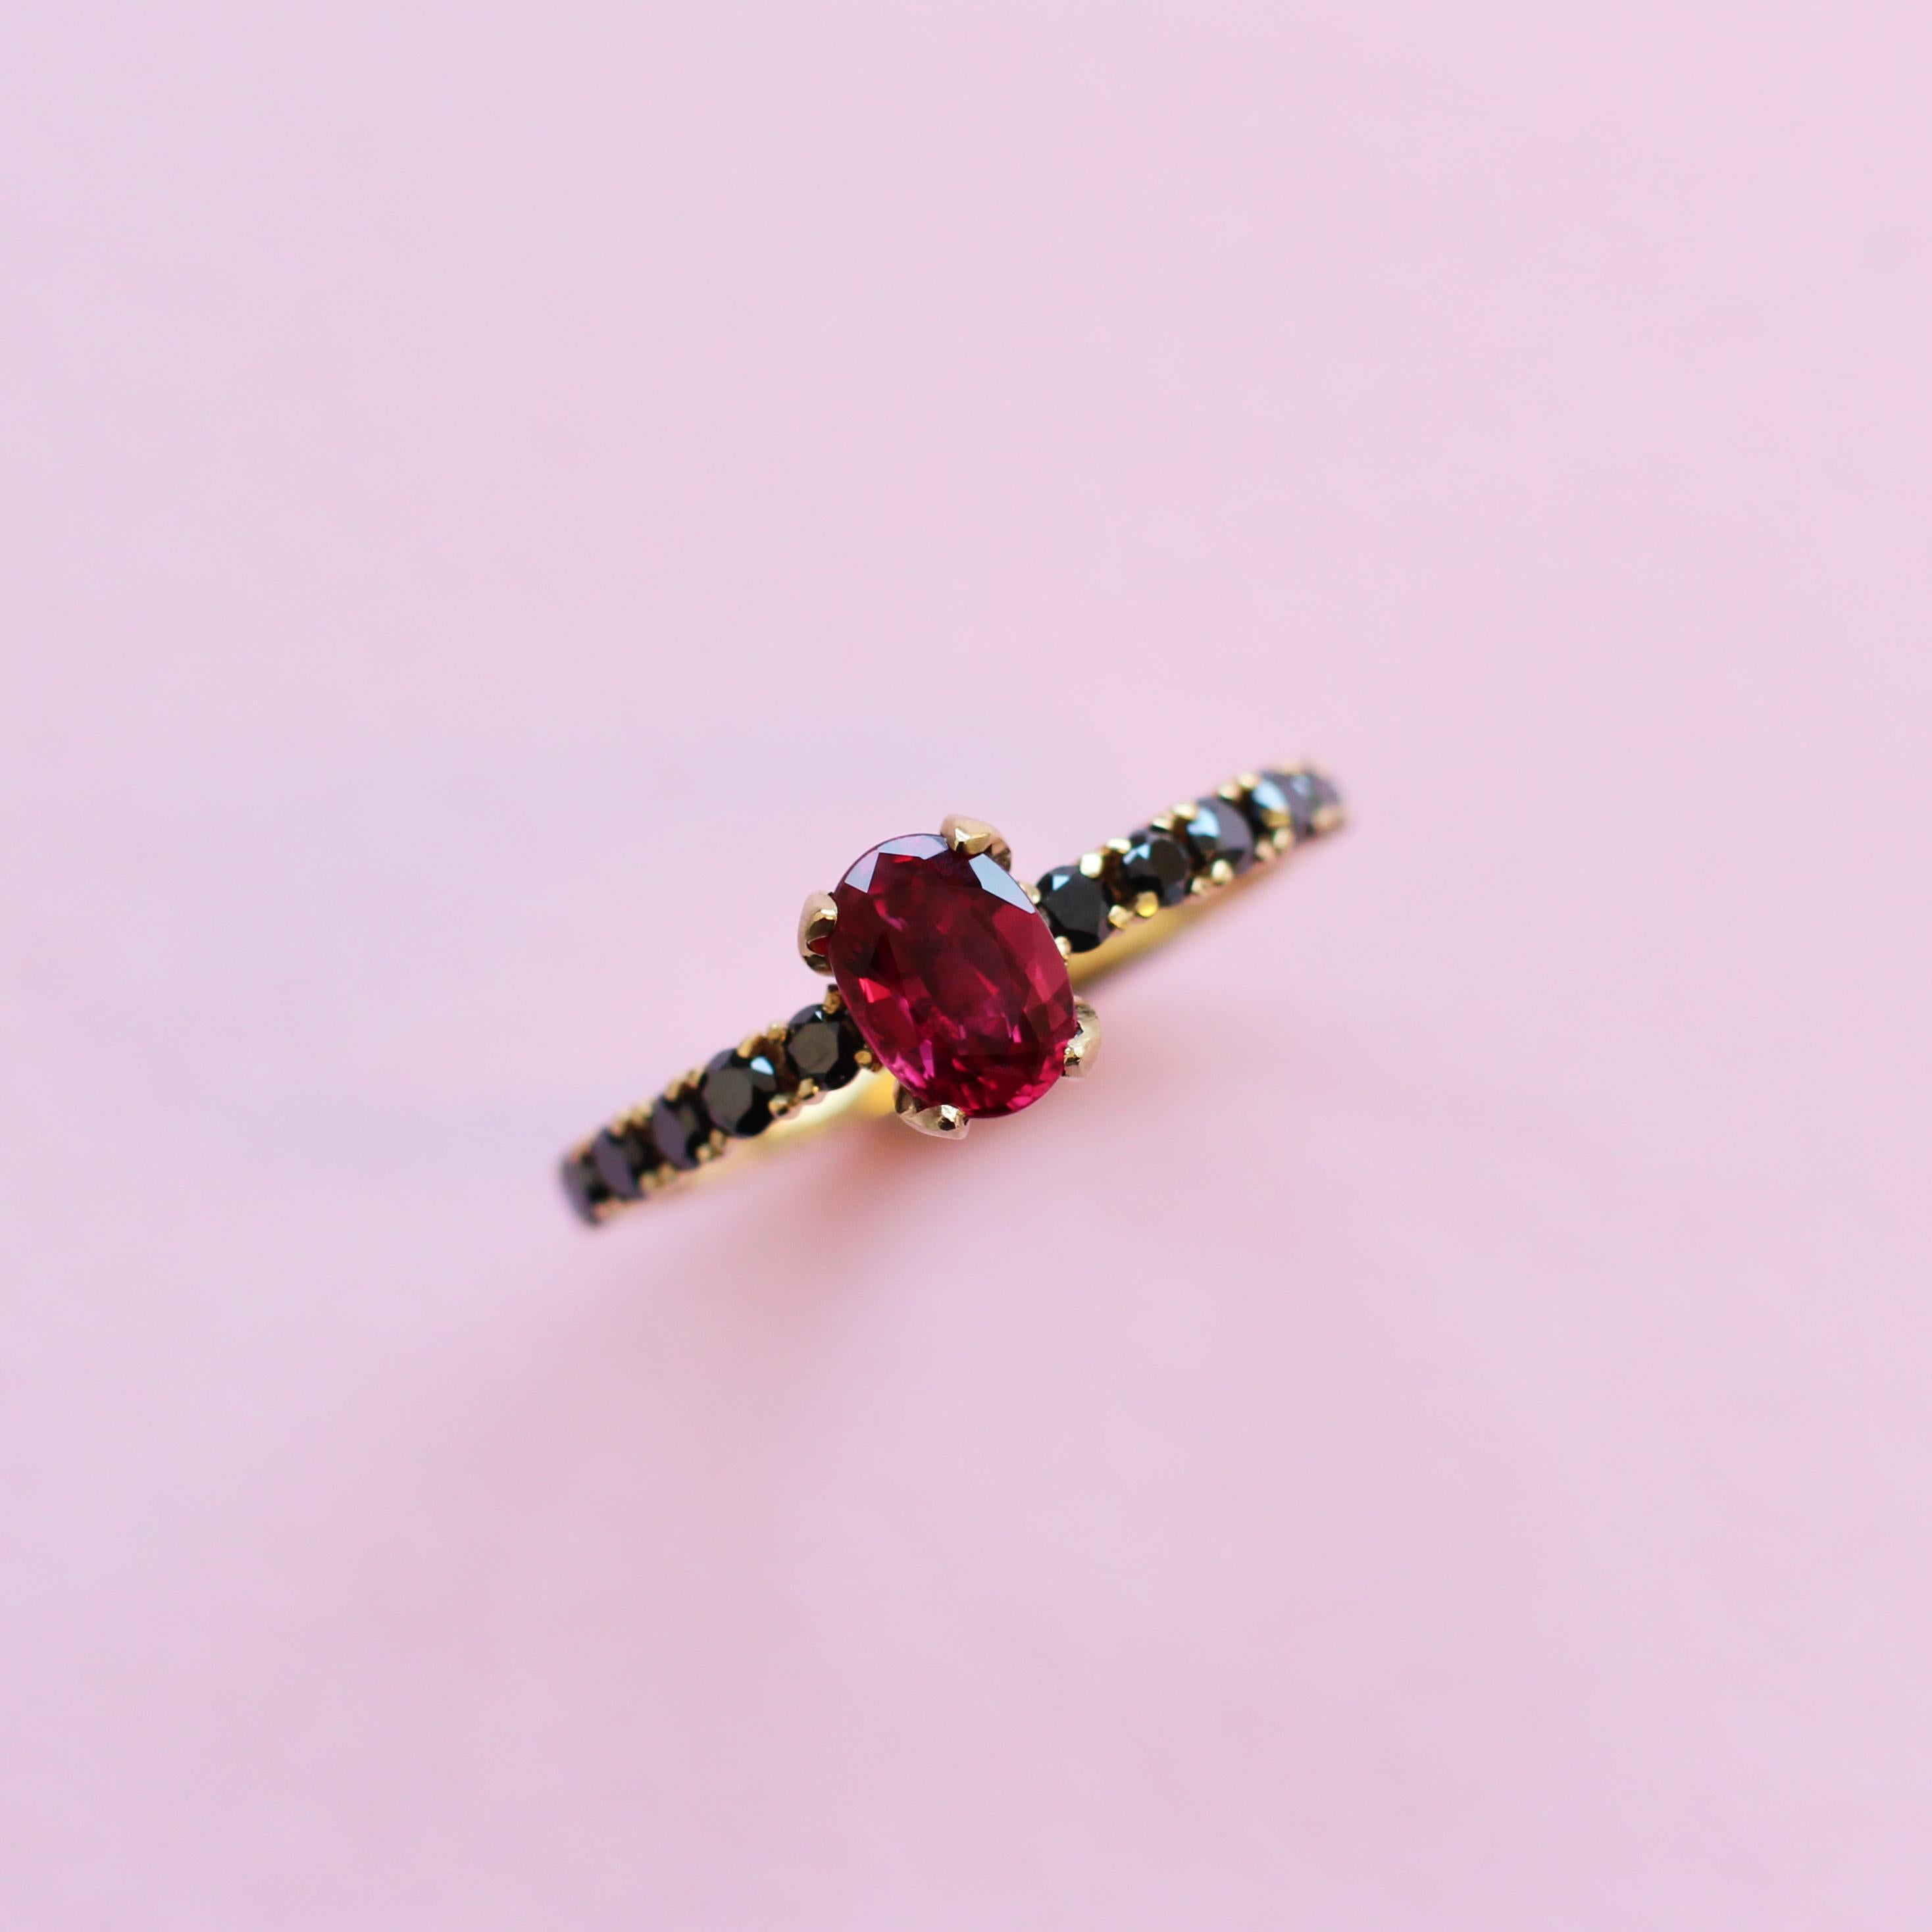 For Sale:  1 Carat Ruby and Black Diamonds Solitaire Ring Set in 18 Karat Yellow Gold 5